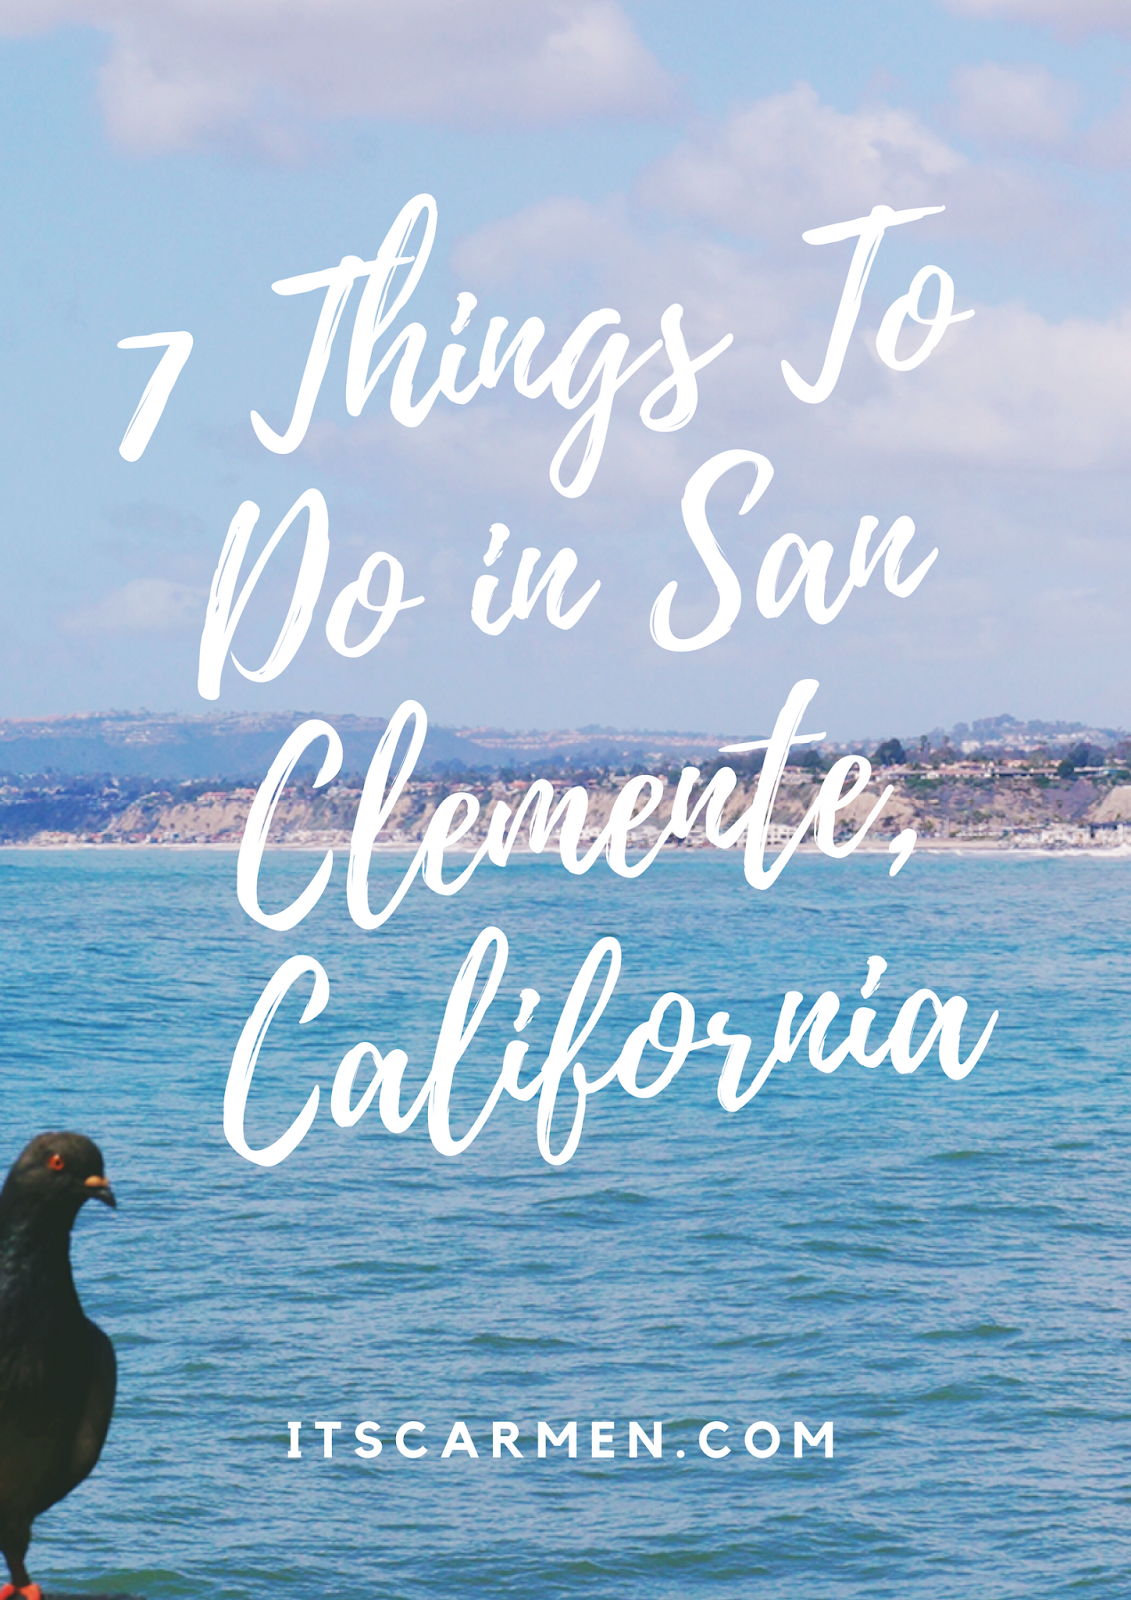 Things To Do in San Clemente, California